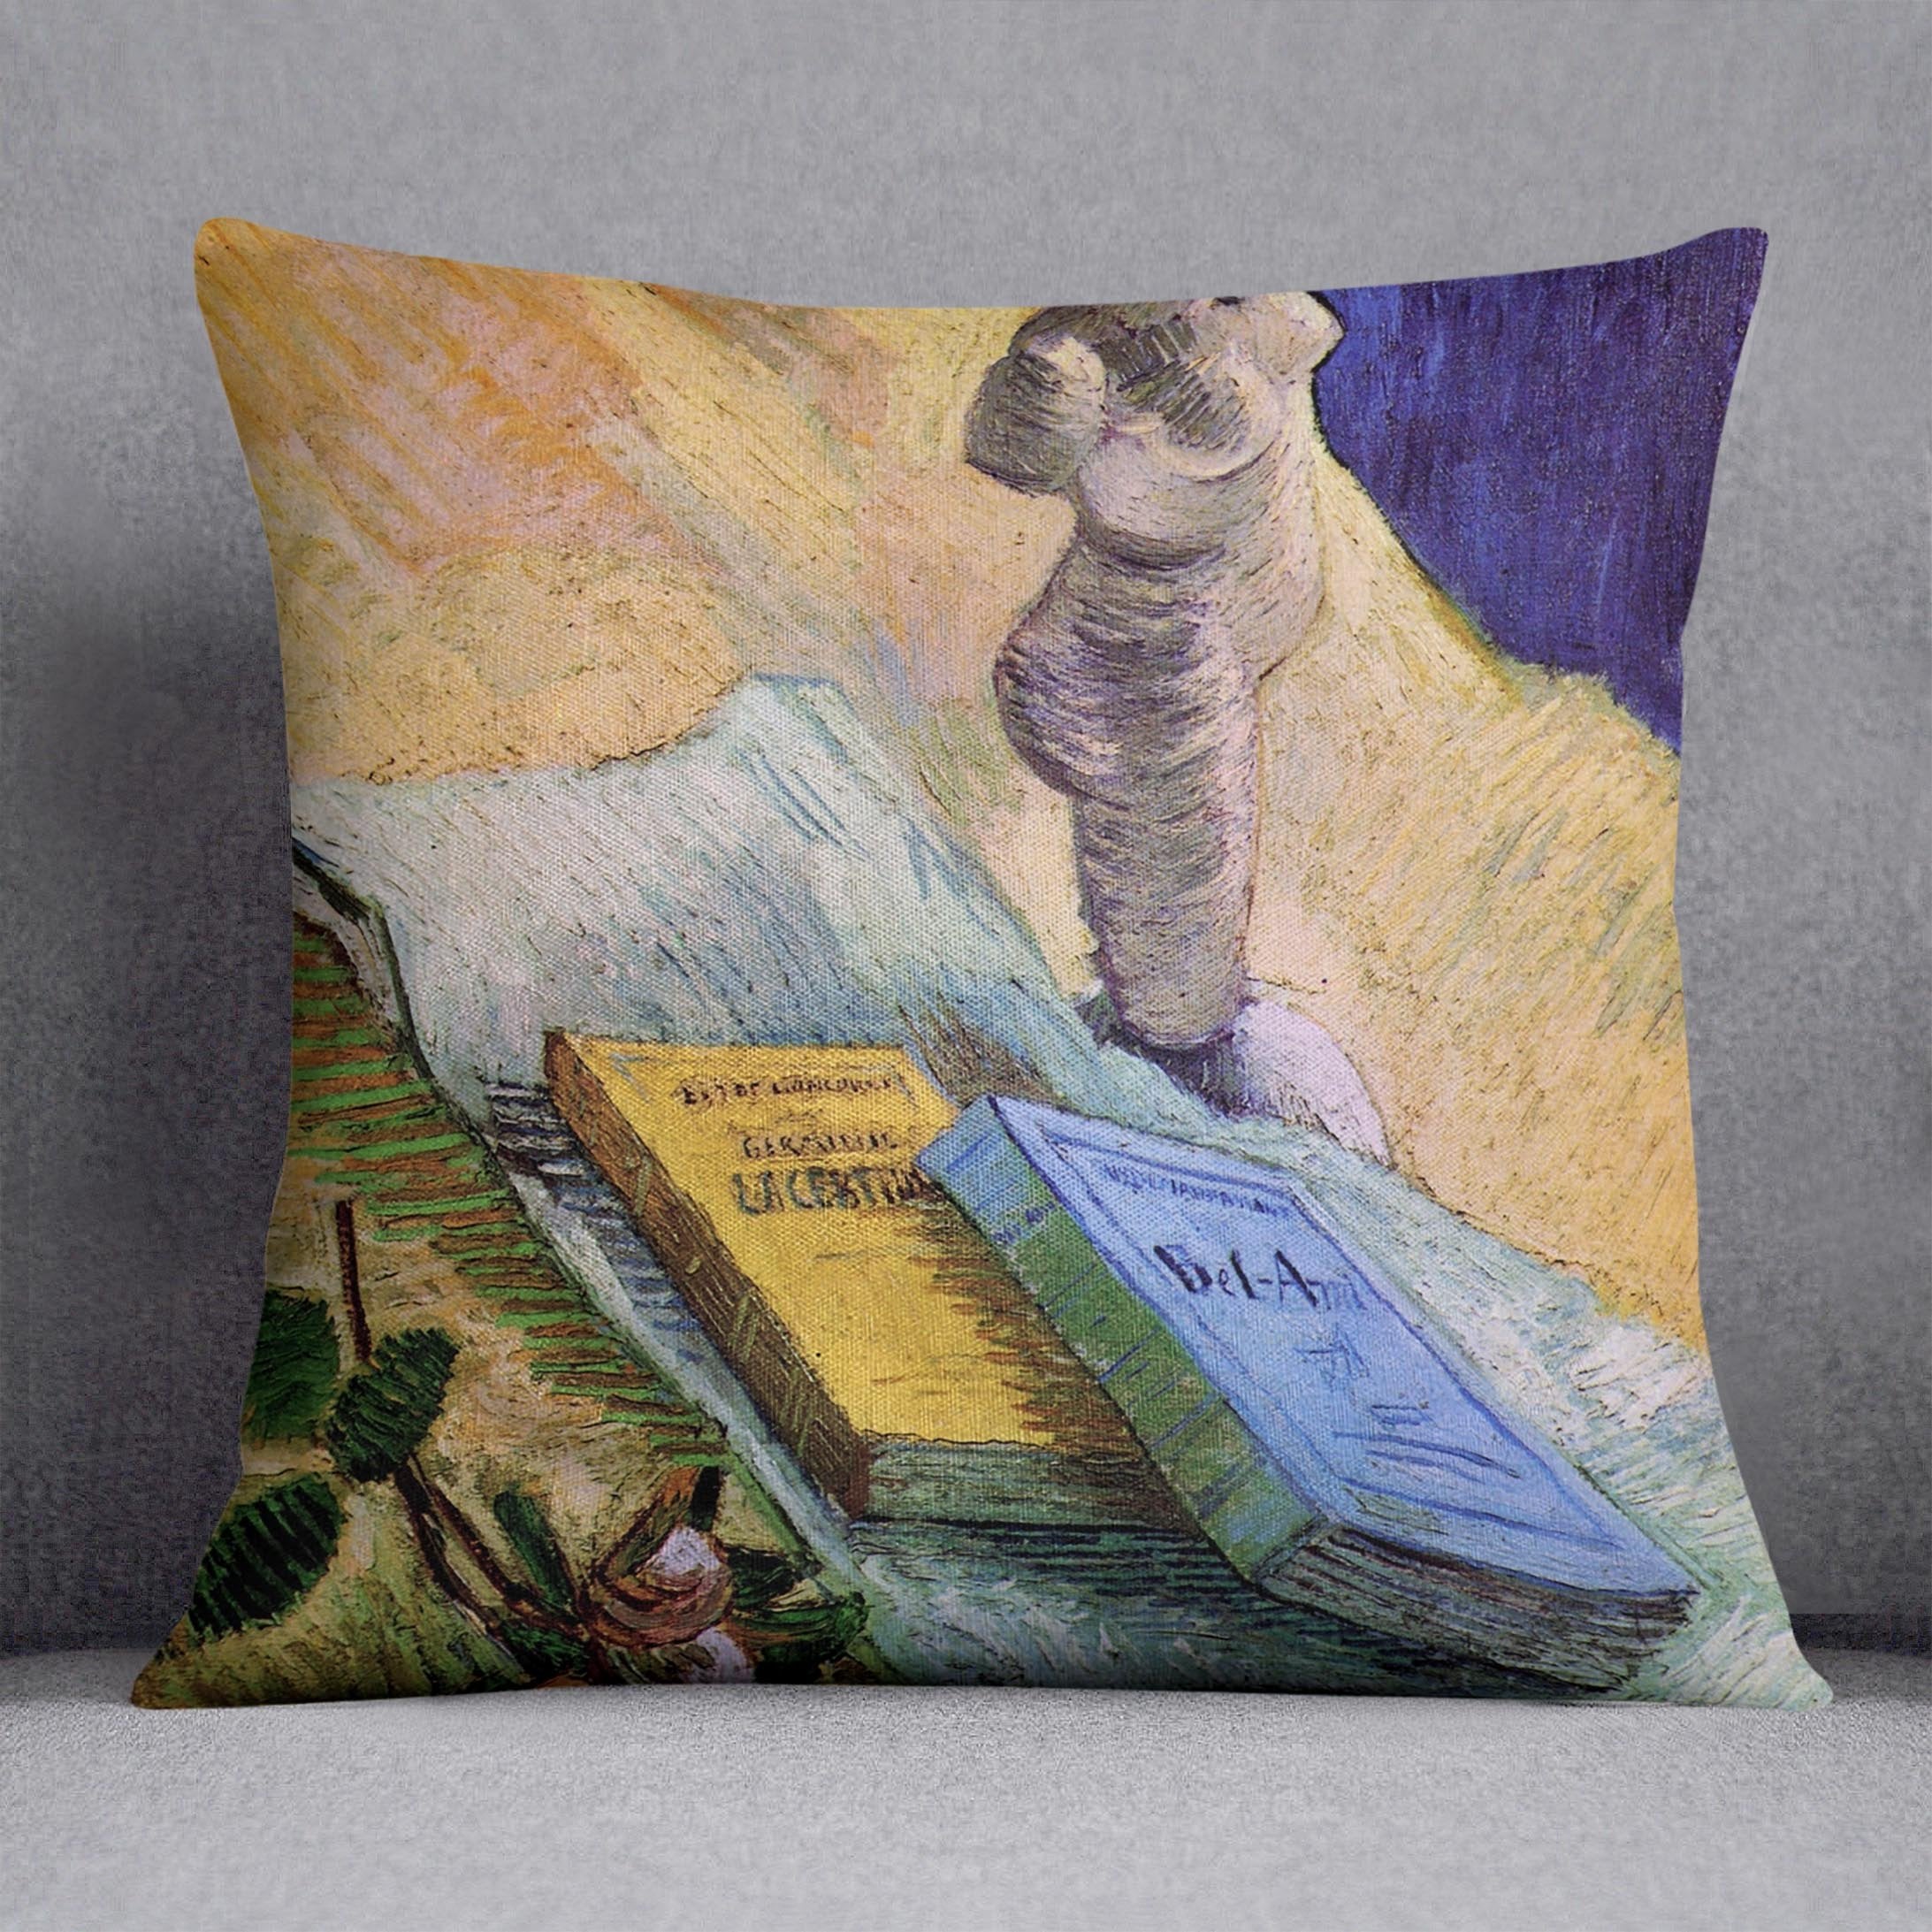 Still Life with Plaster Statuette a Rose and Two Novels by Van Gogh Throw Pillow